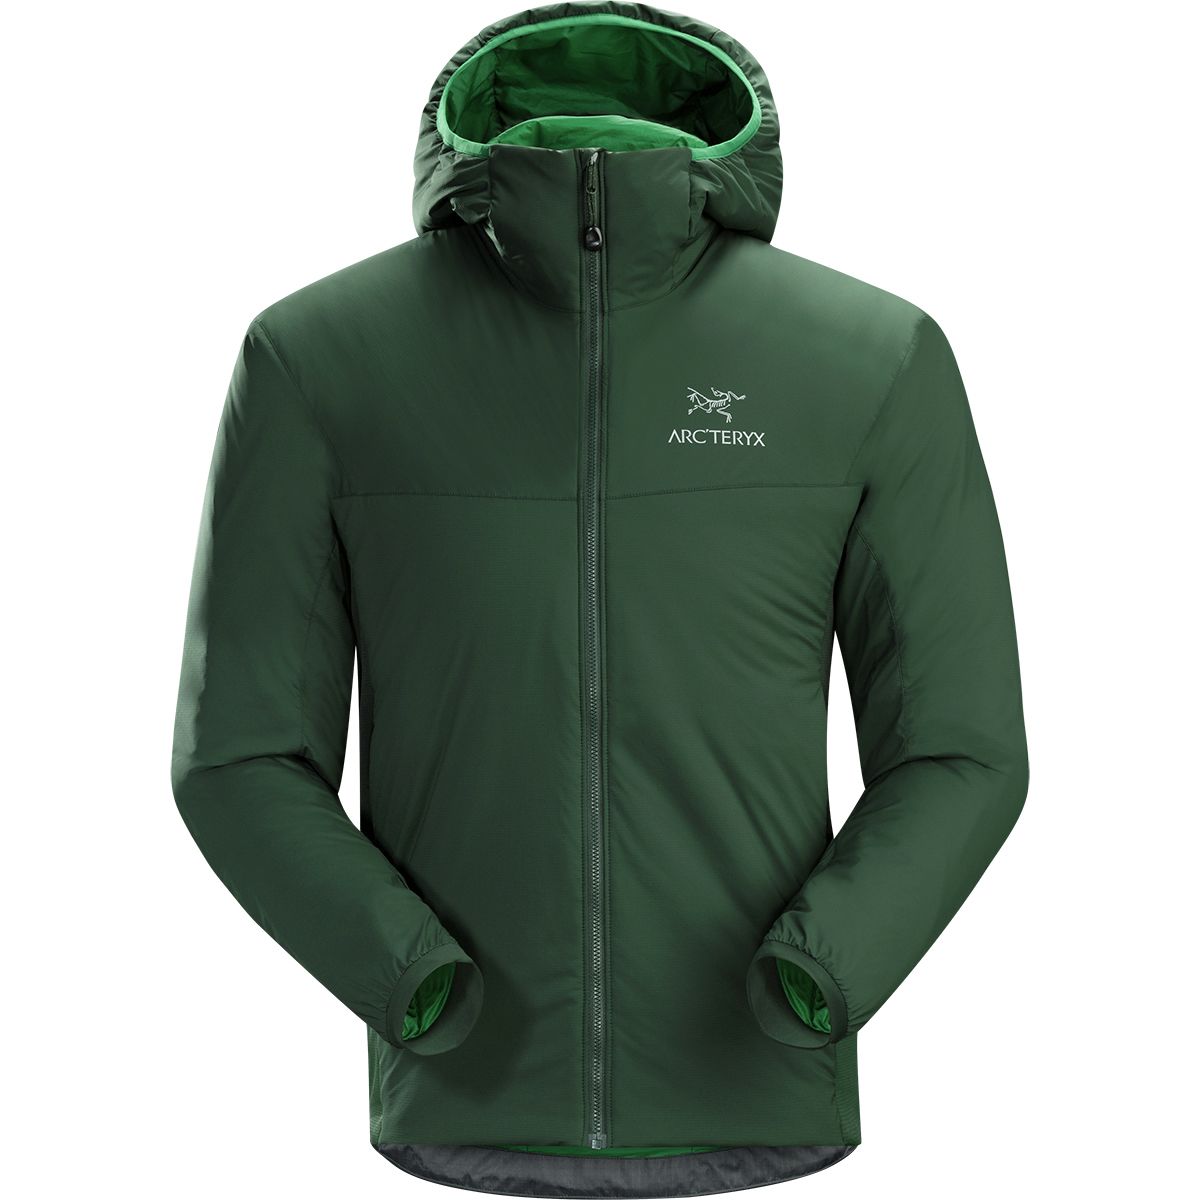 Insulated Jacket for camping